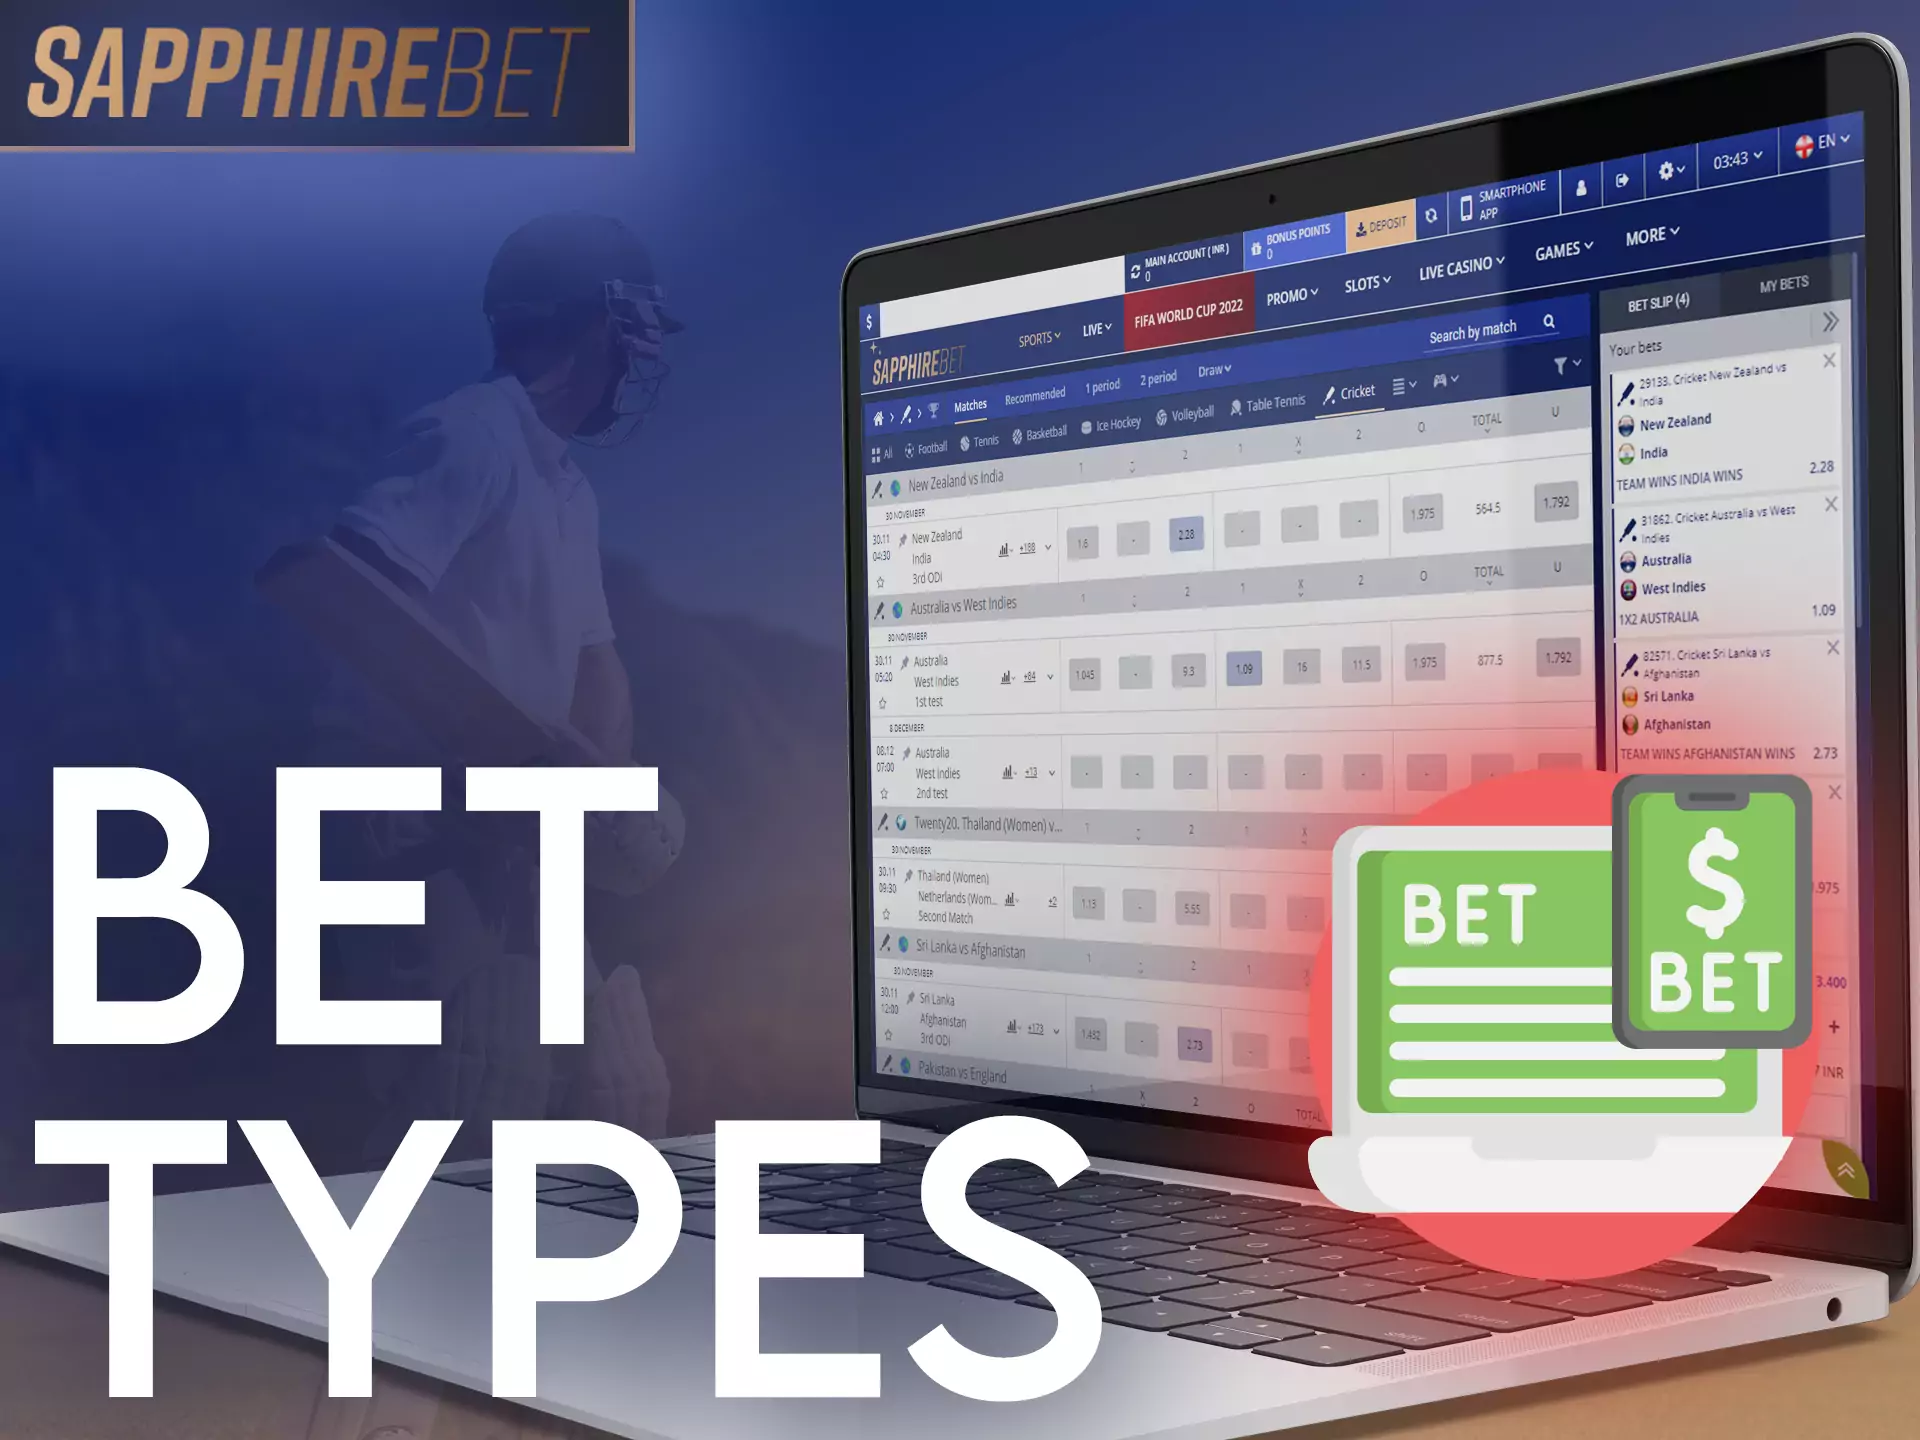 There are different types of bets in Sapphirebet, find your suitable option.